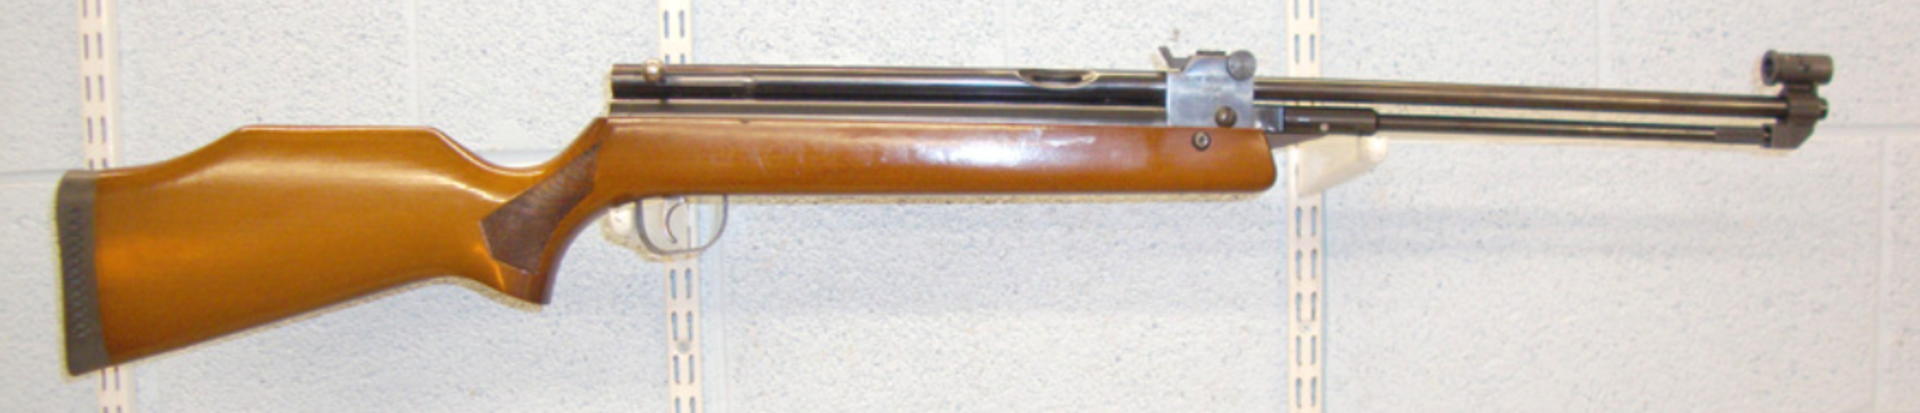 Rare, Early 1990's, Patent Pending, British Sterling Armaments HR-81, .22 Calibre Bolt Action Rifle